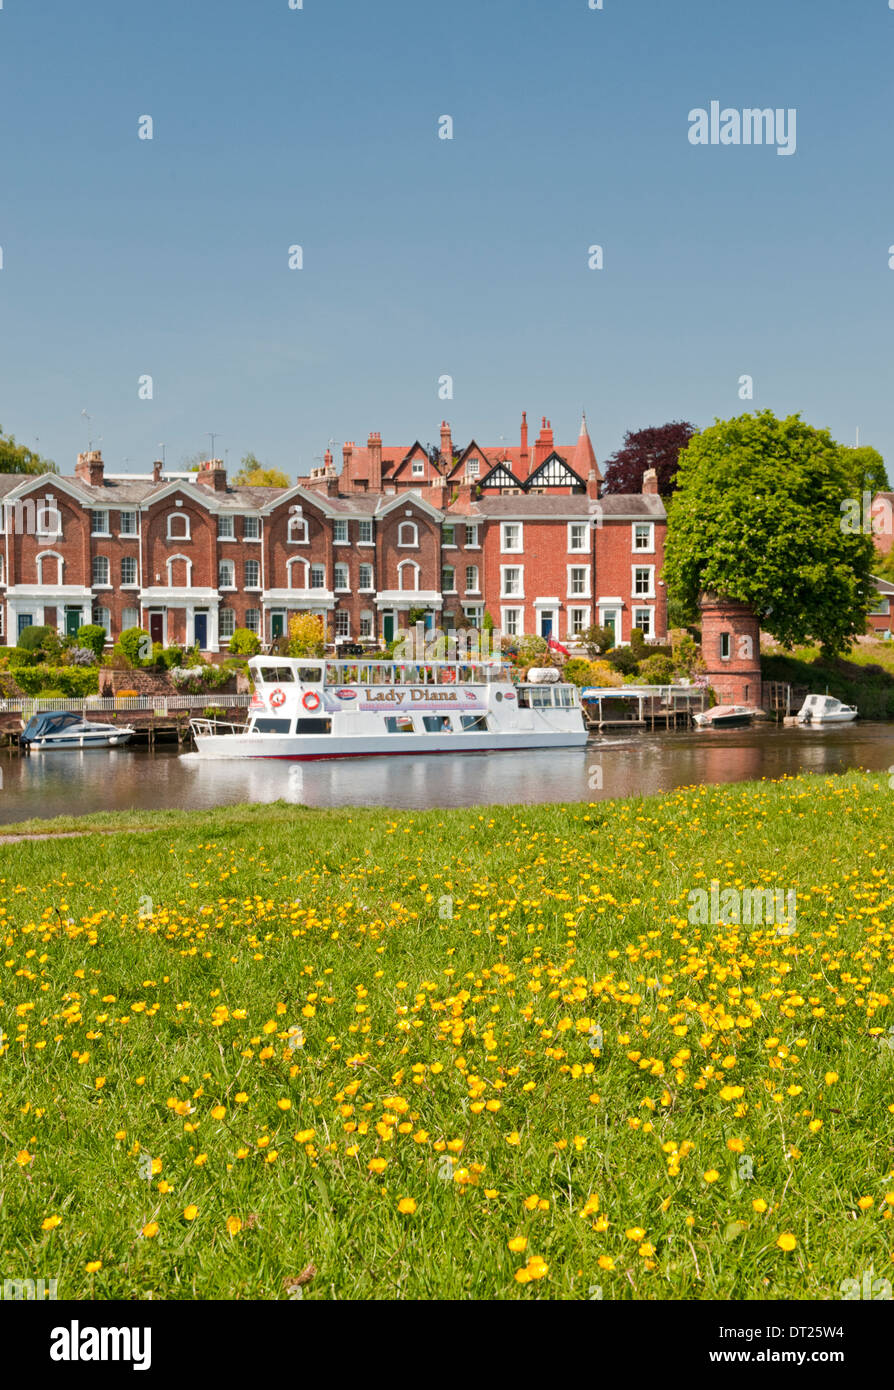 Lady Diana Tourboat on The River Dee, Chester, Cheshire, England, UK Stock Photo